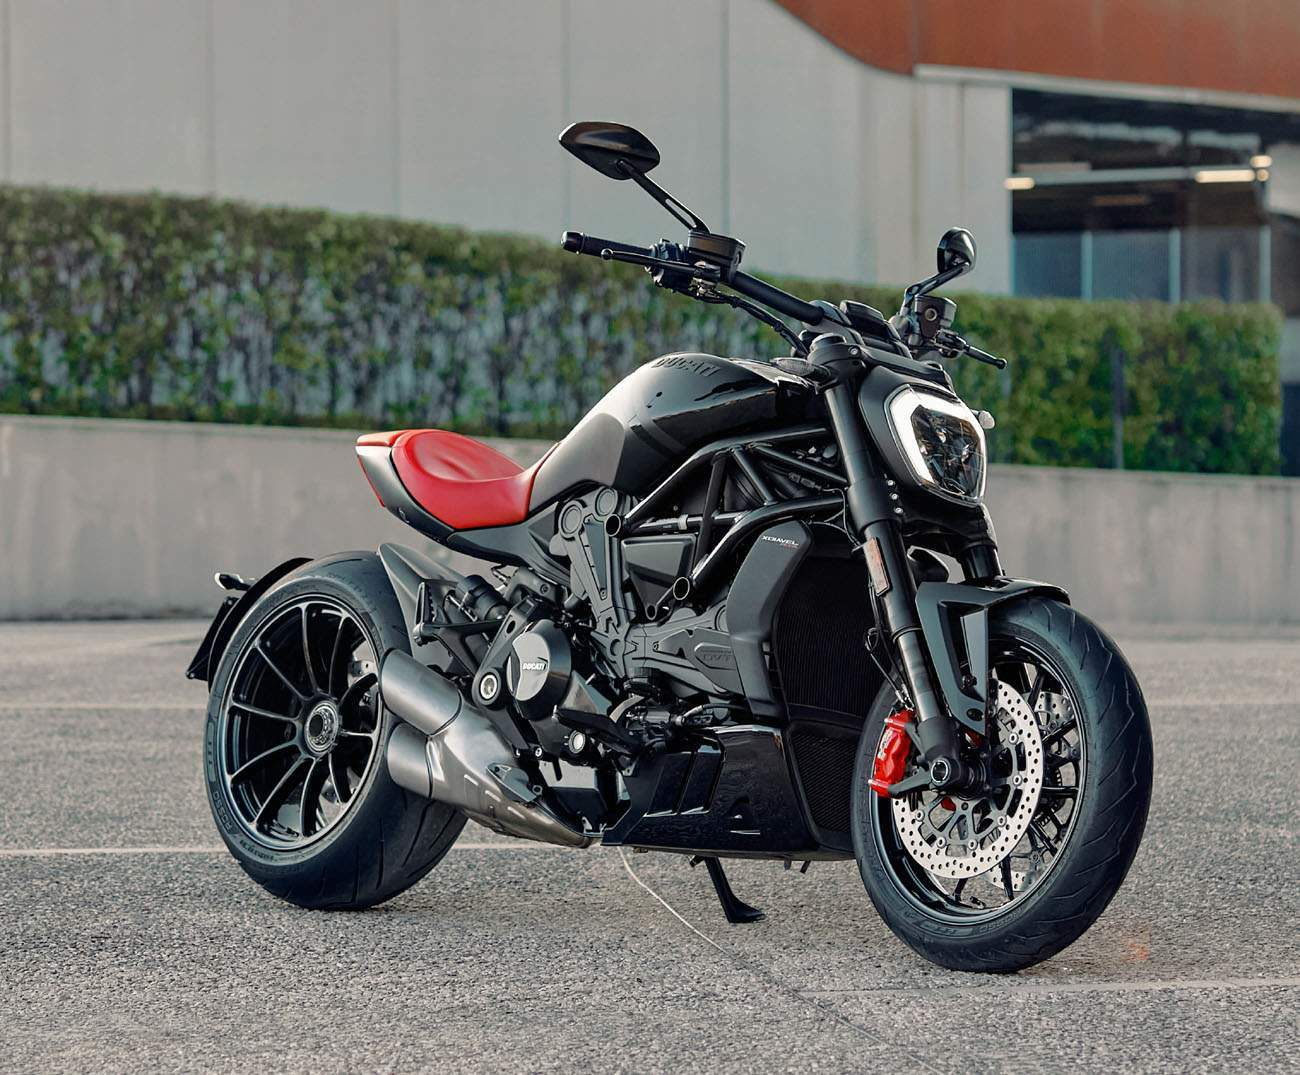 Ducati XDiavel Nera Limited Edition technical specifications